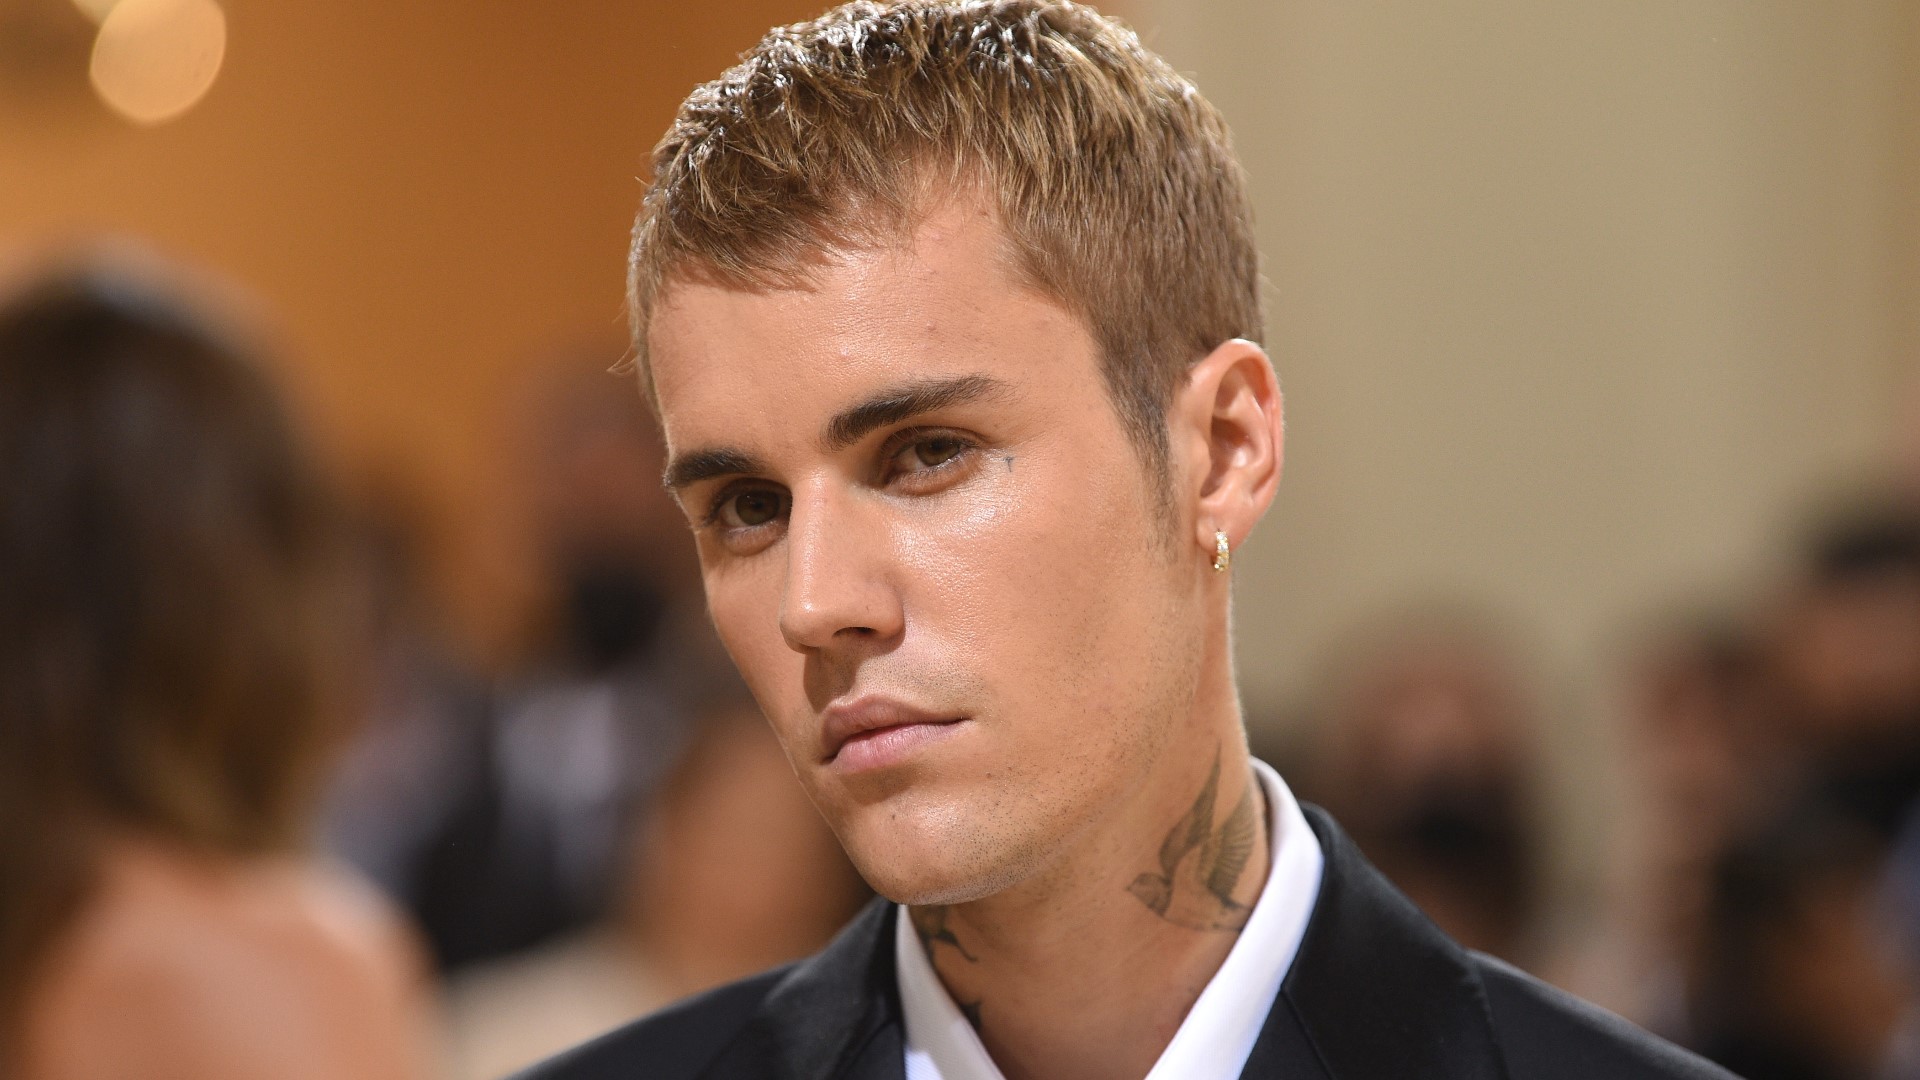 Earlier this summer, the pop star revealed he had a condition that left one side of his face paralyzed.